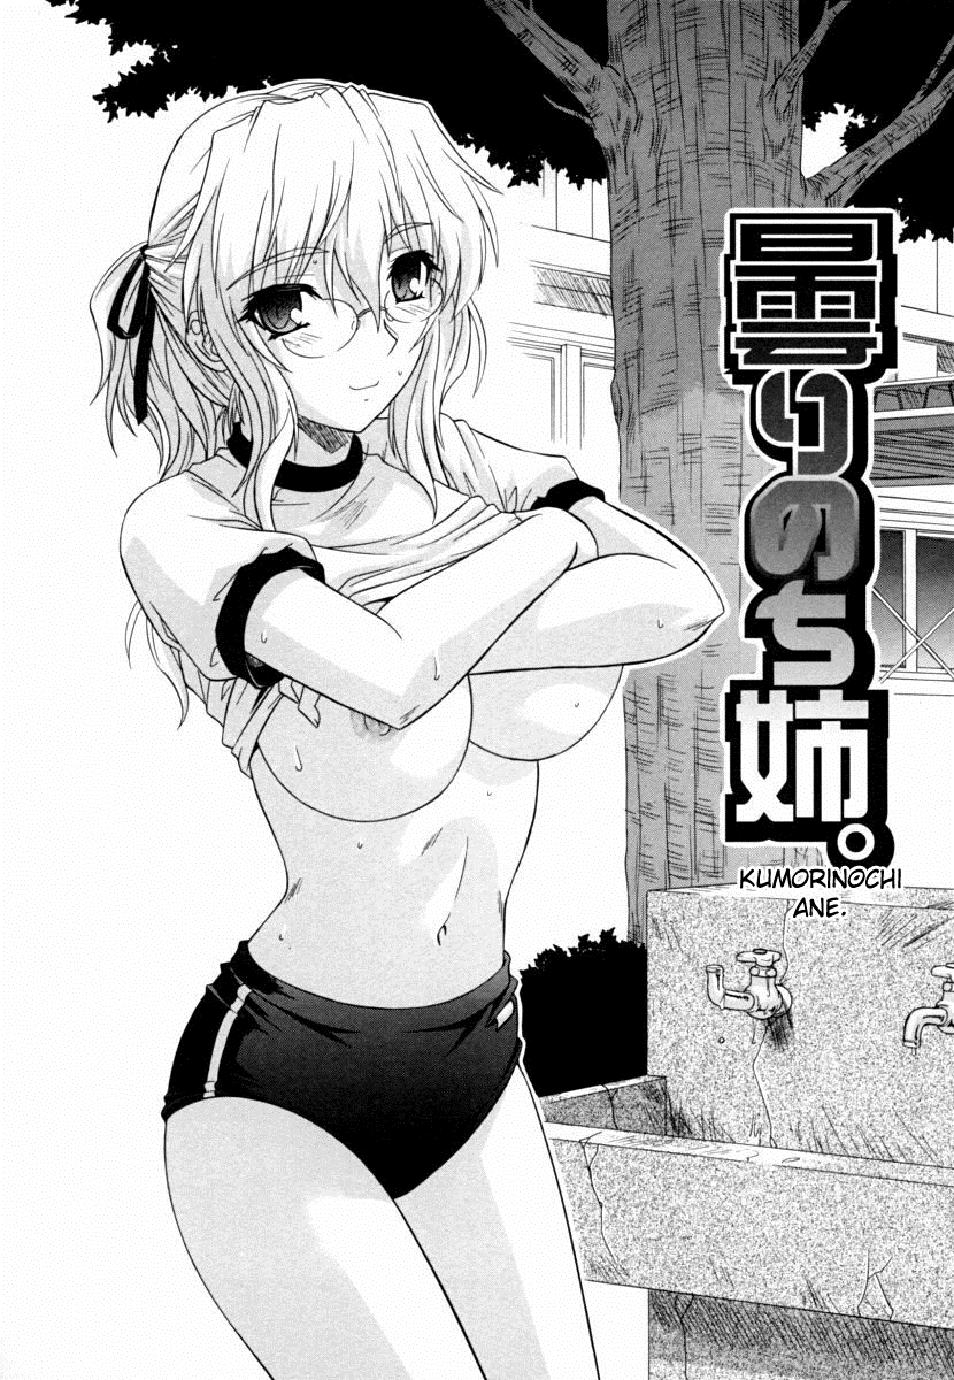 Ane no Mune 1-6 Chapter-3 - 16